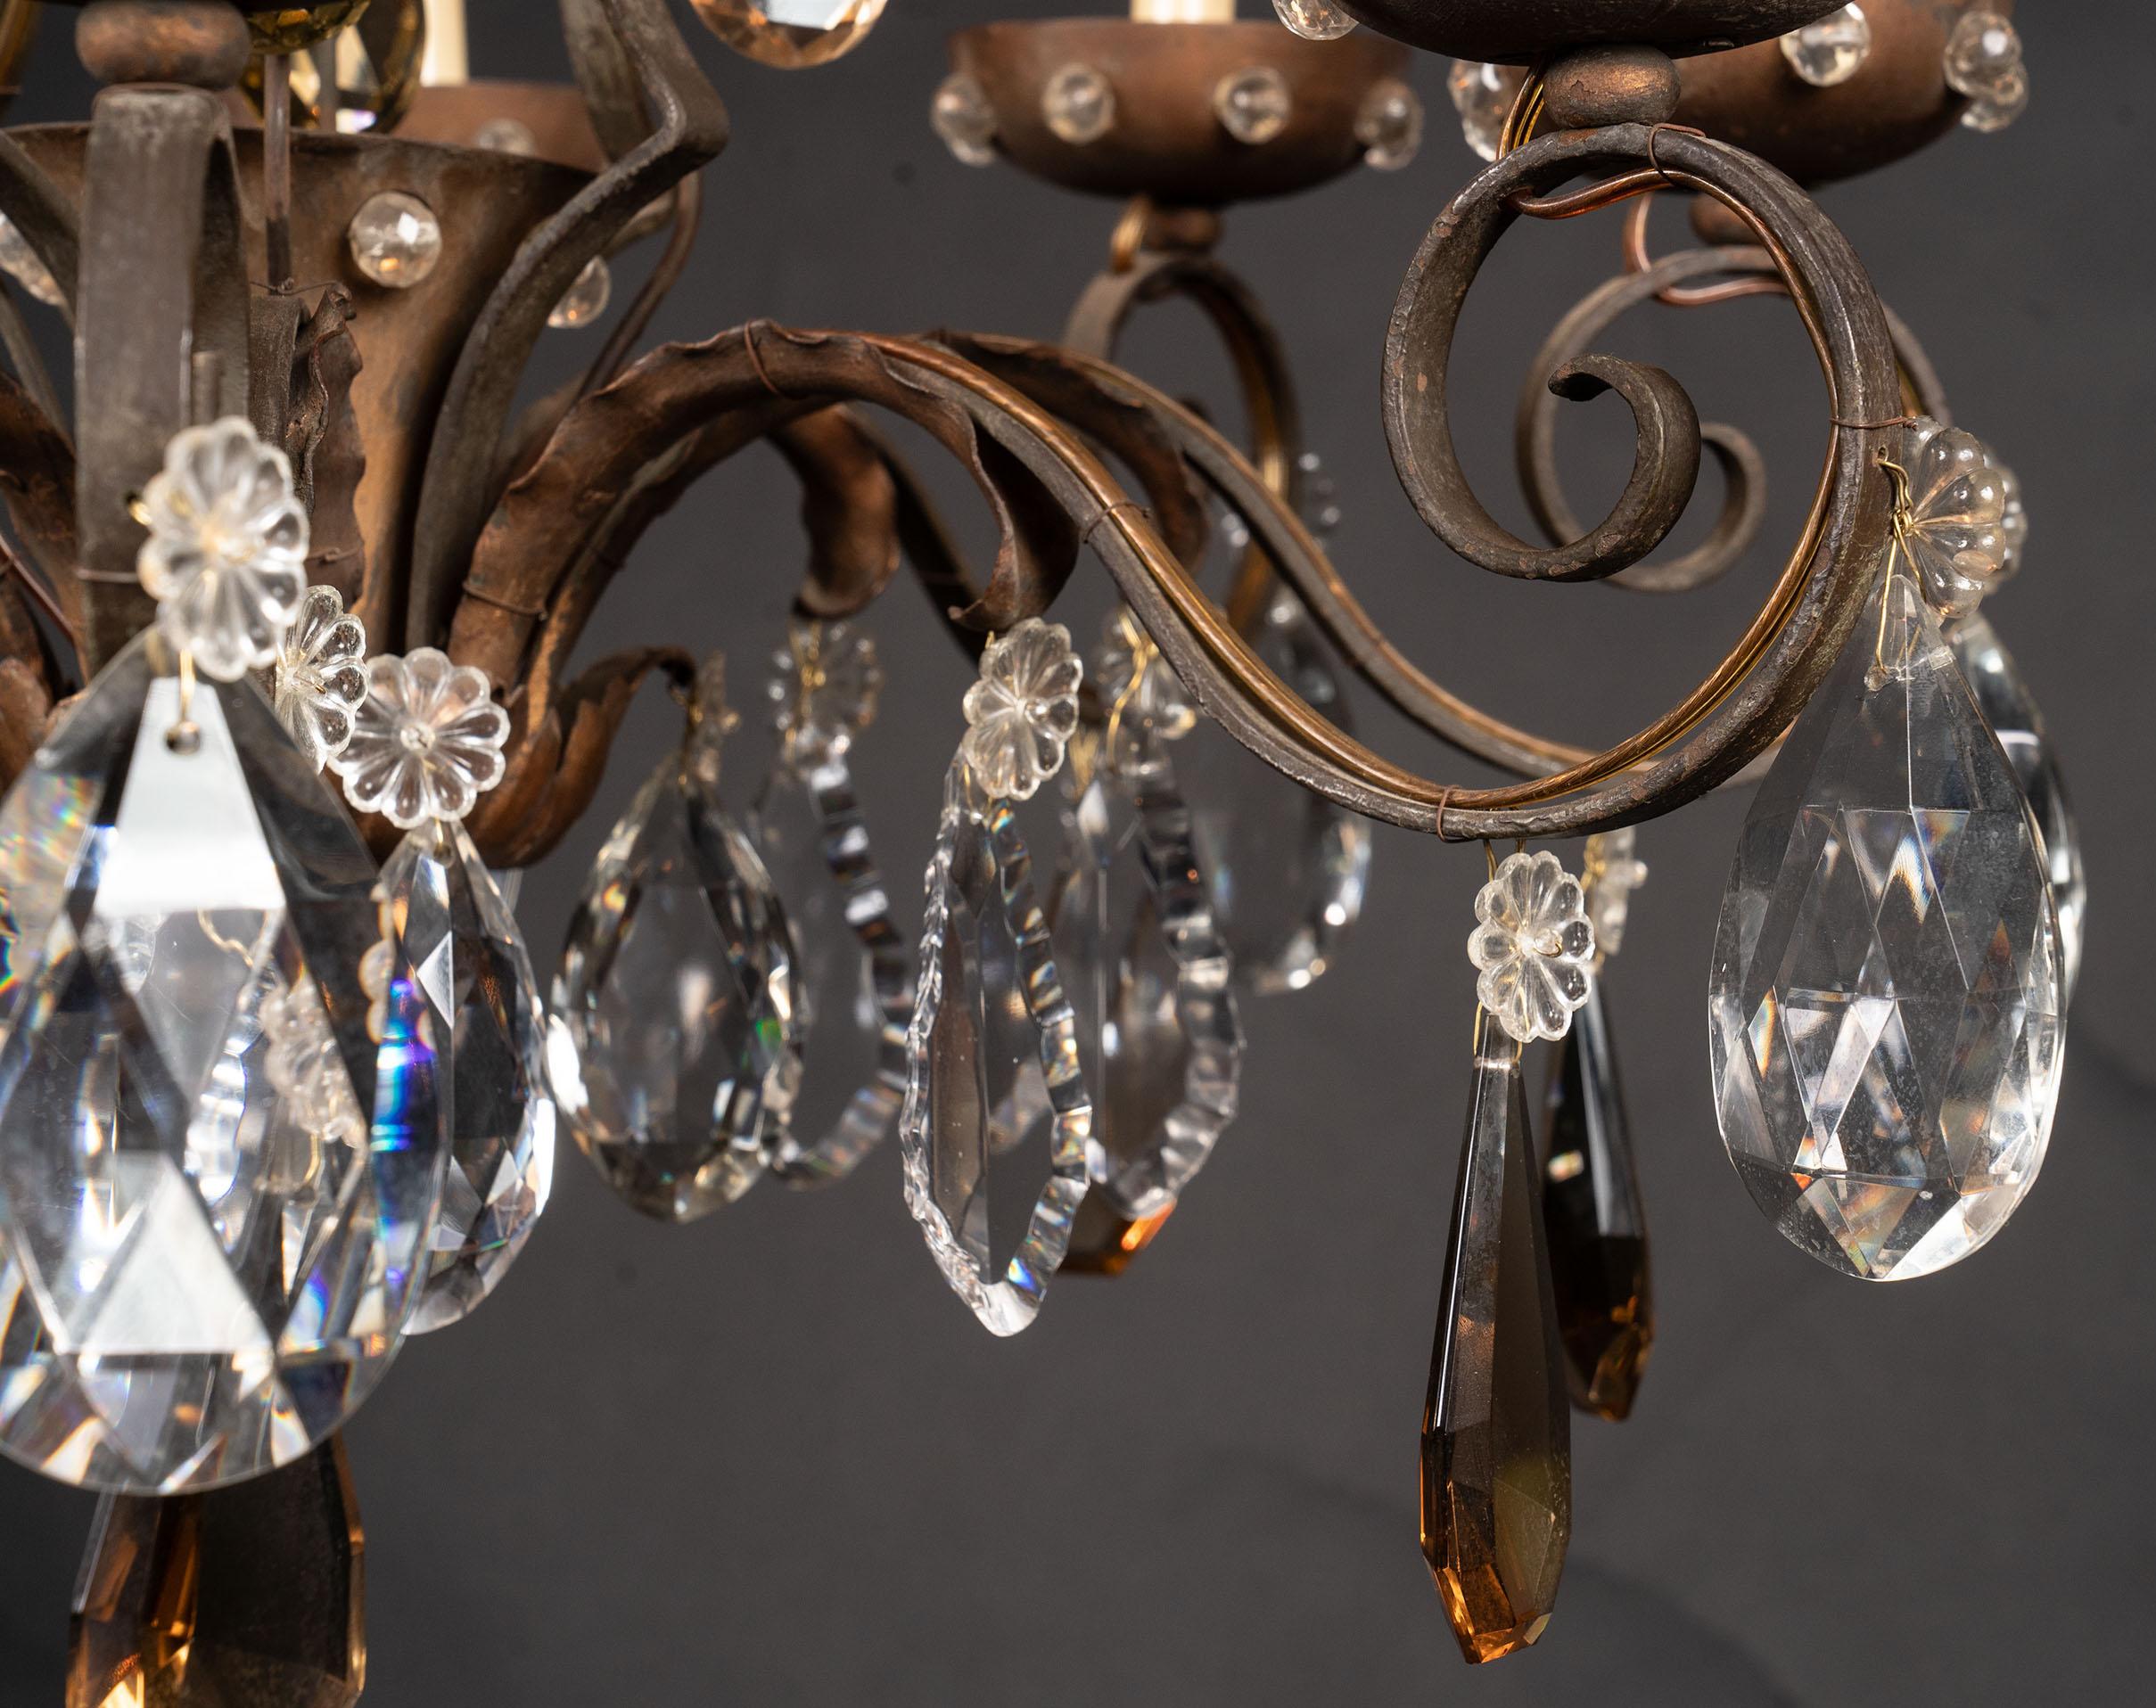 This beautiful Louis XV style chandelier features the bird cage like shape classic to the period, and is made of iron and draped in a variety of crystals. The French light fixture dates back to the 19th century and plays host to crystal plaquettes